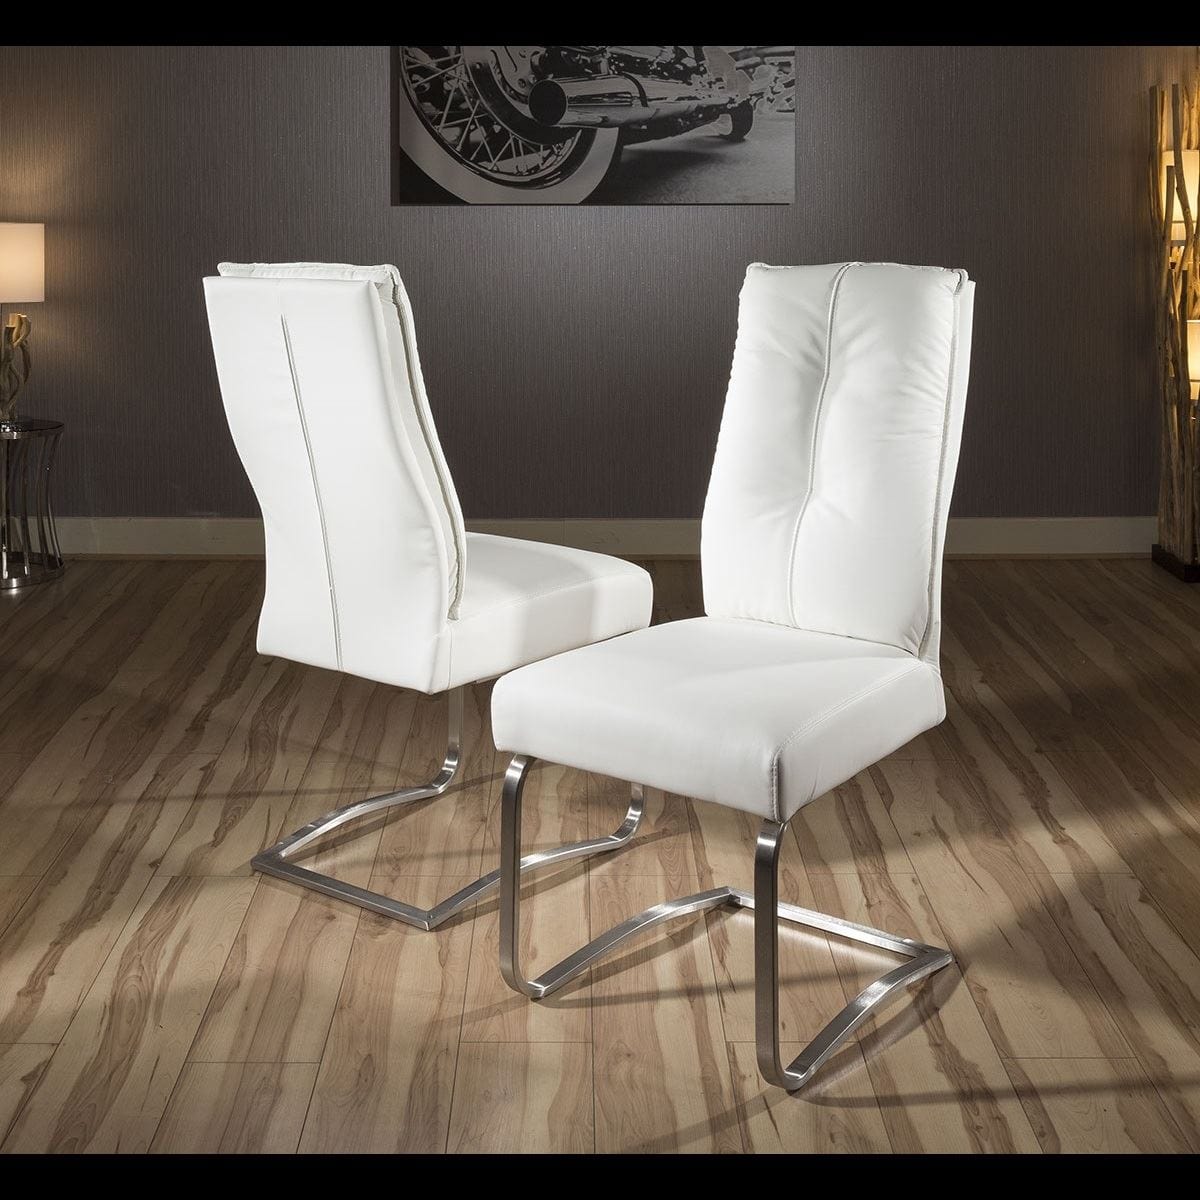 Quatropi 2 White Leather Cantilever Dining Chairs